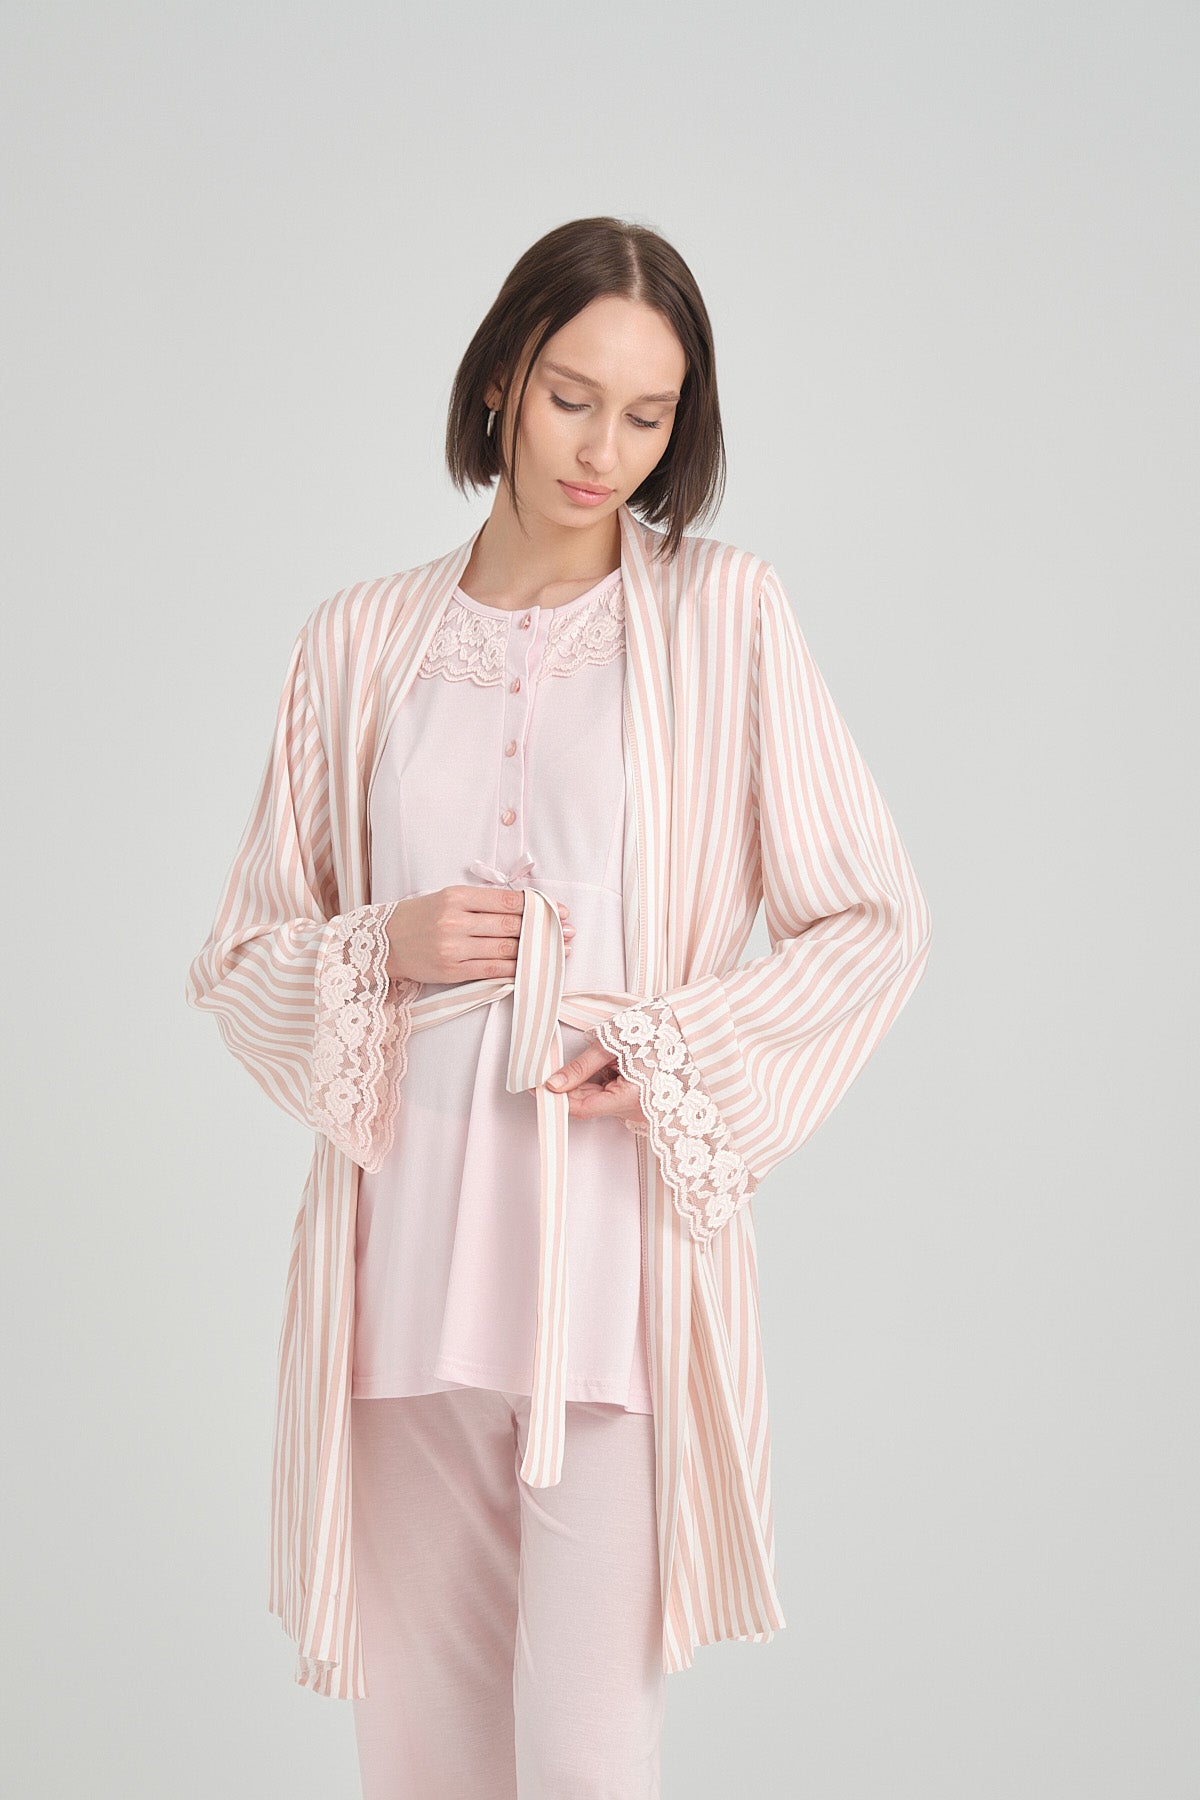 Shopymommy 2369 Lace Collar 3-Pieces Maternity & Nursing Pajamas With Stripe Robe Pink